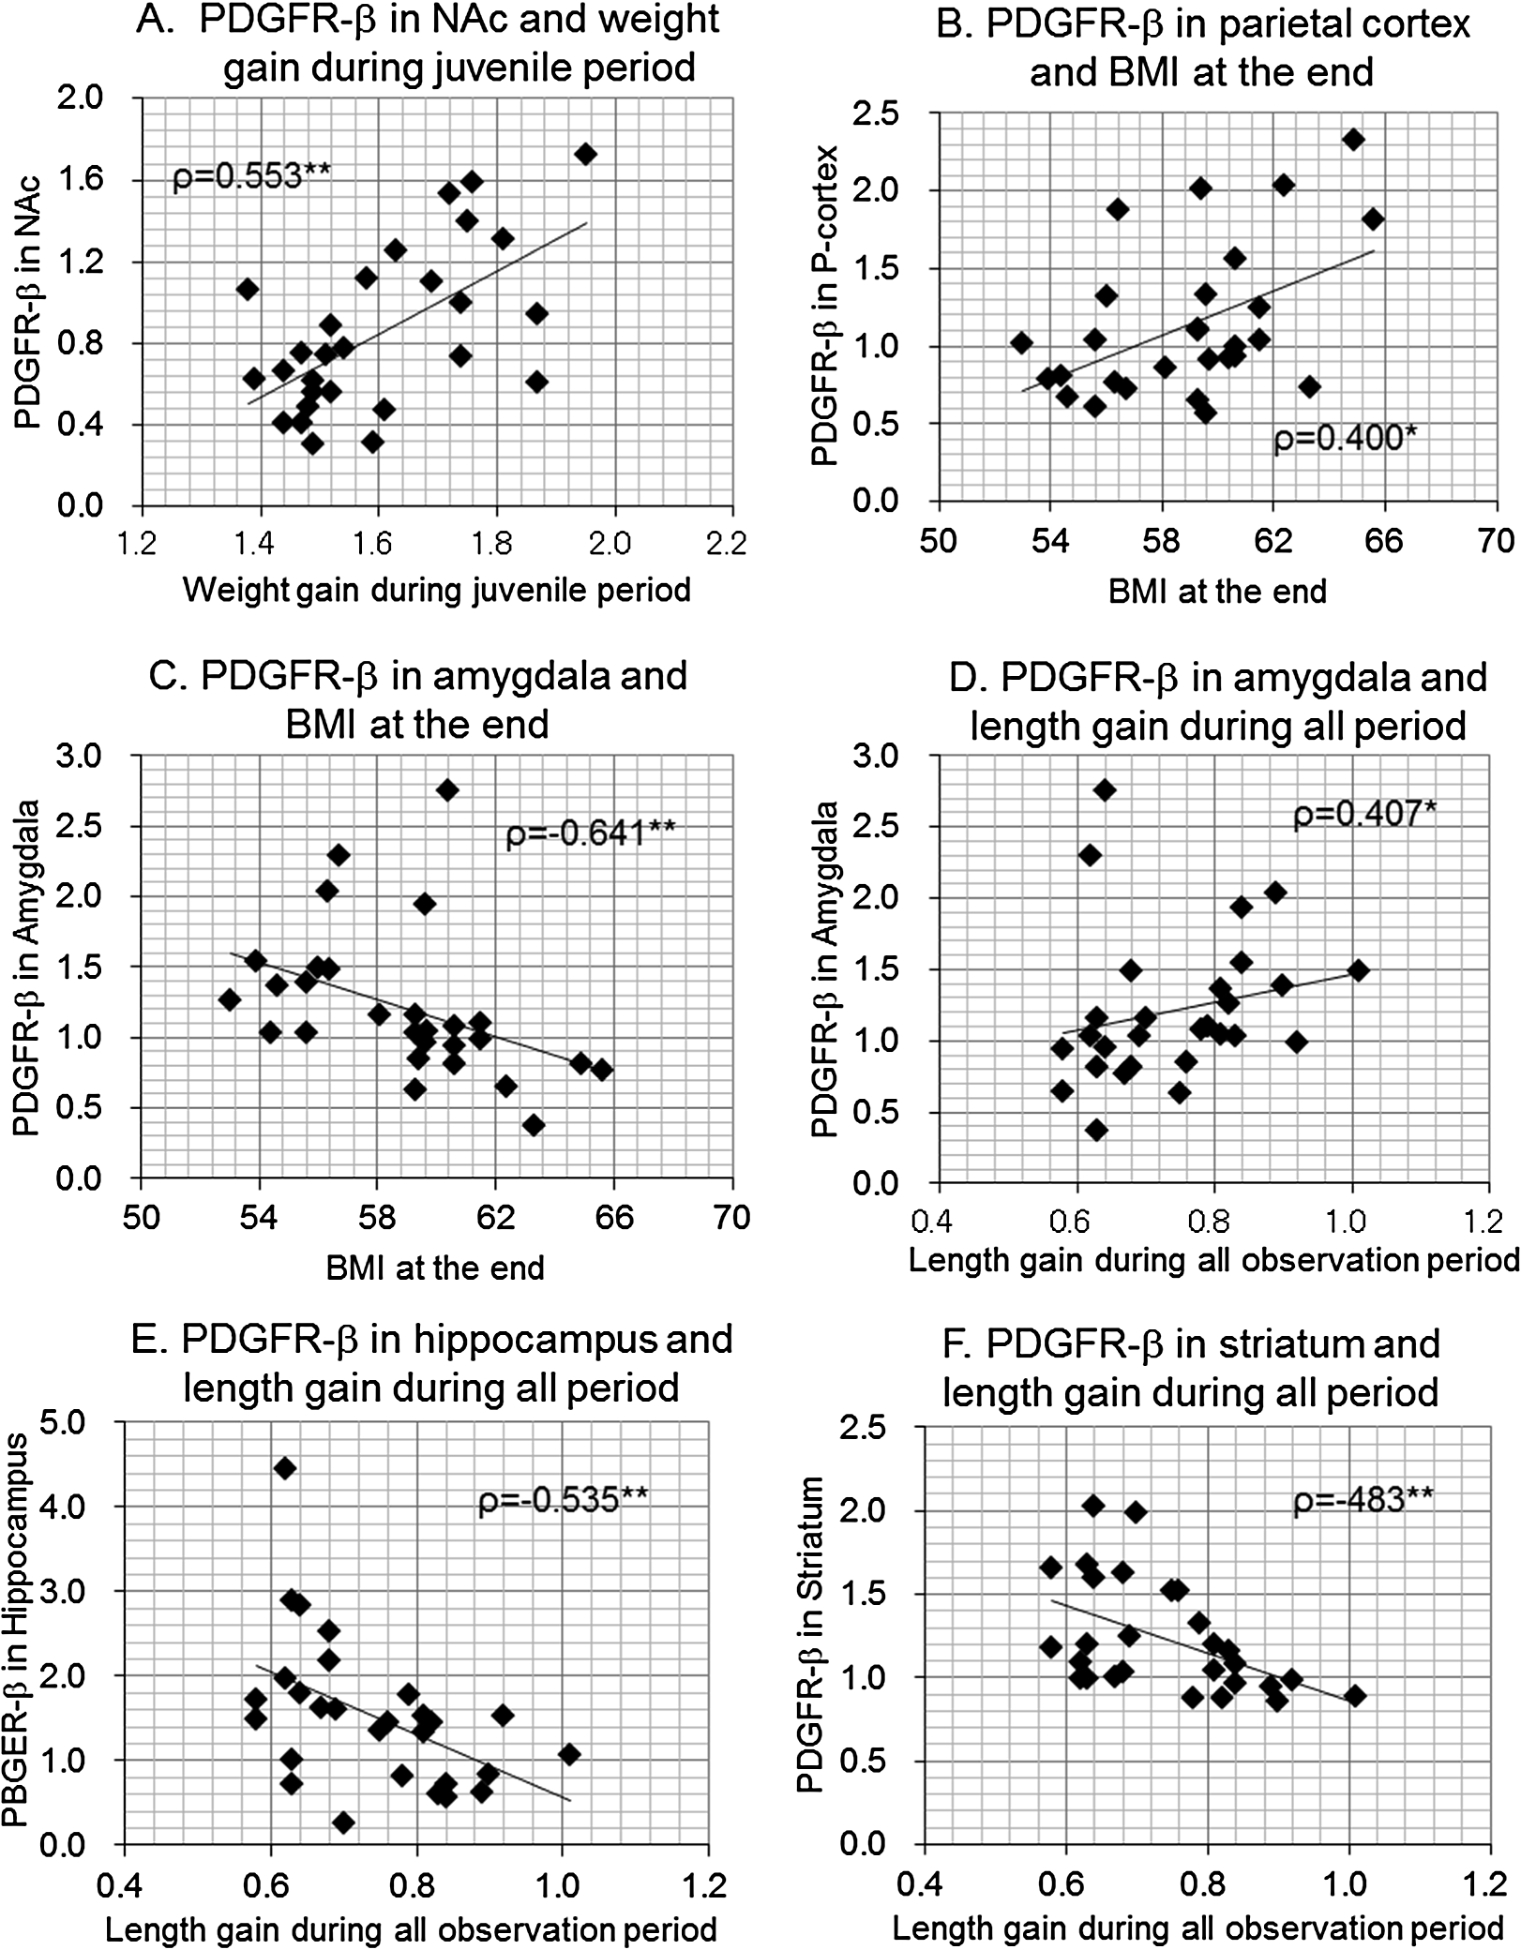 Scatterplots between body size gains or BMI and brain PDGFR-β levels in male offspring. Correlation coefficients (Spearman’s ρ) were shown with p-values. ∗p<0.05, ∗∗p<0.01.